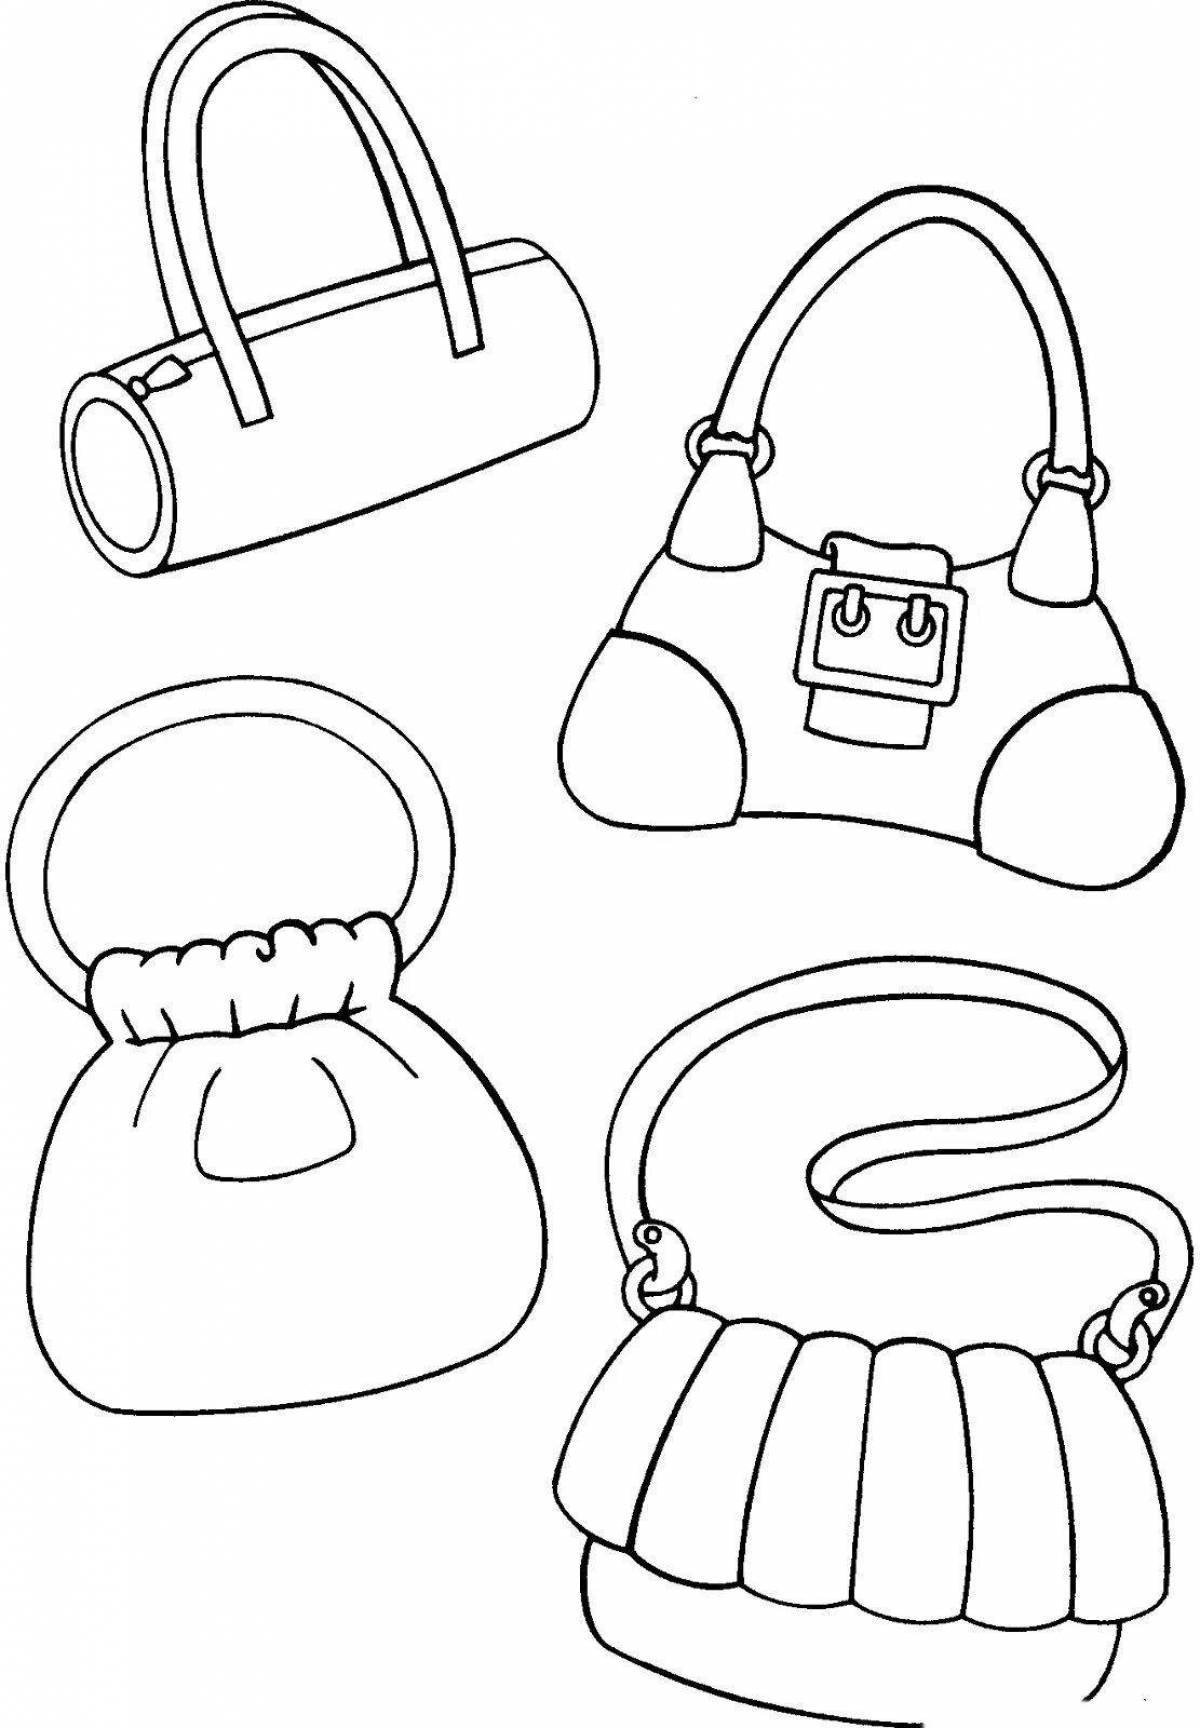 Coloring page glamor accessories for girls